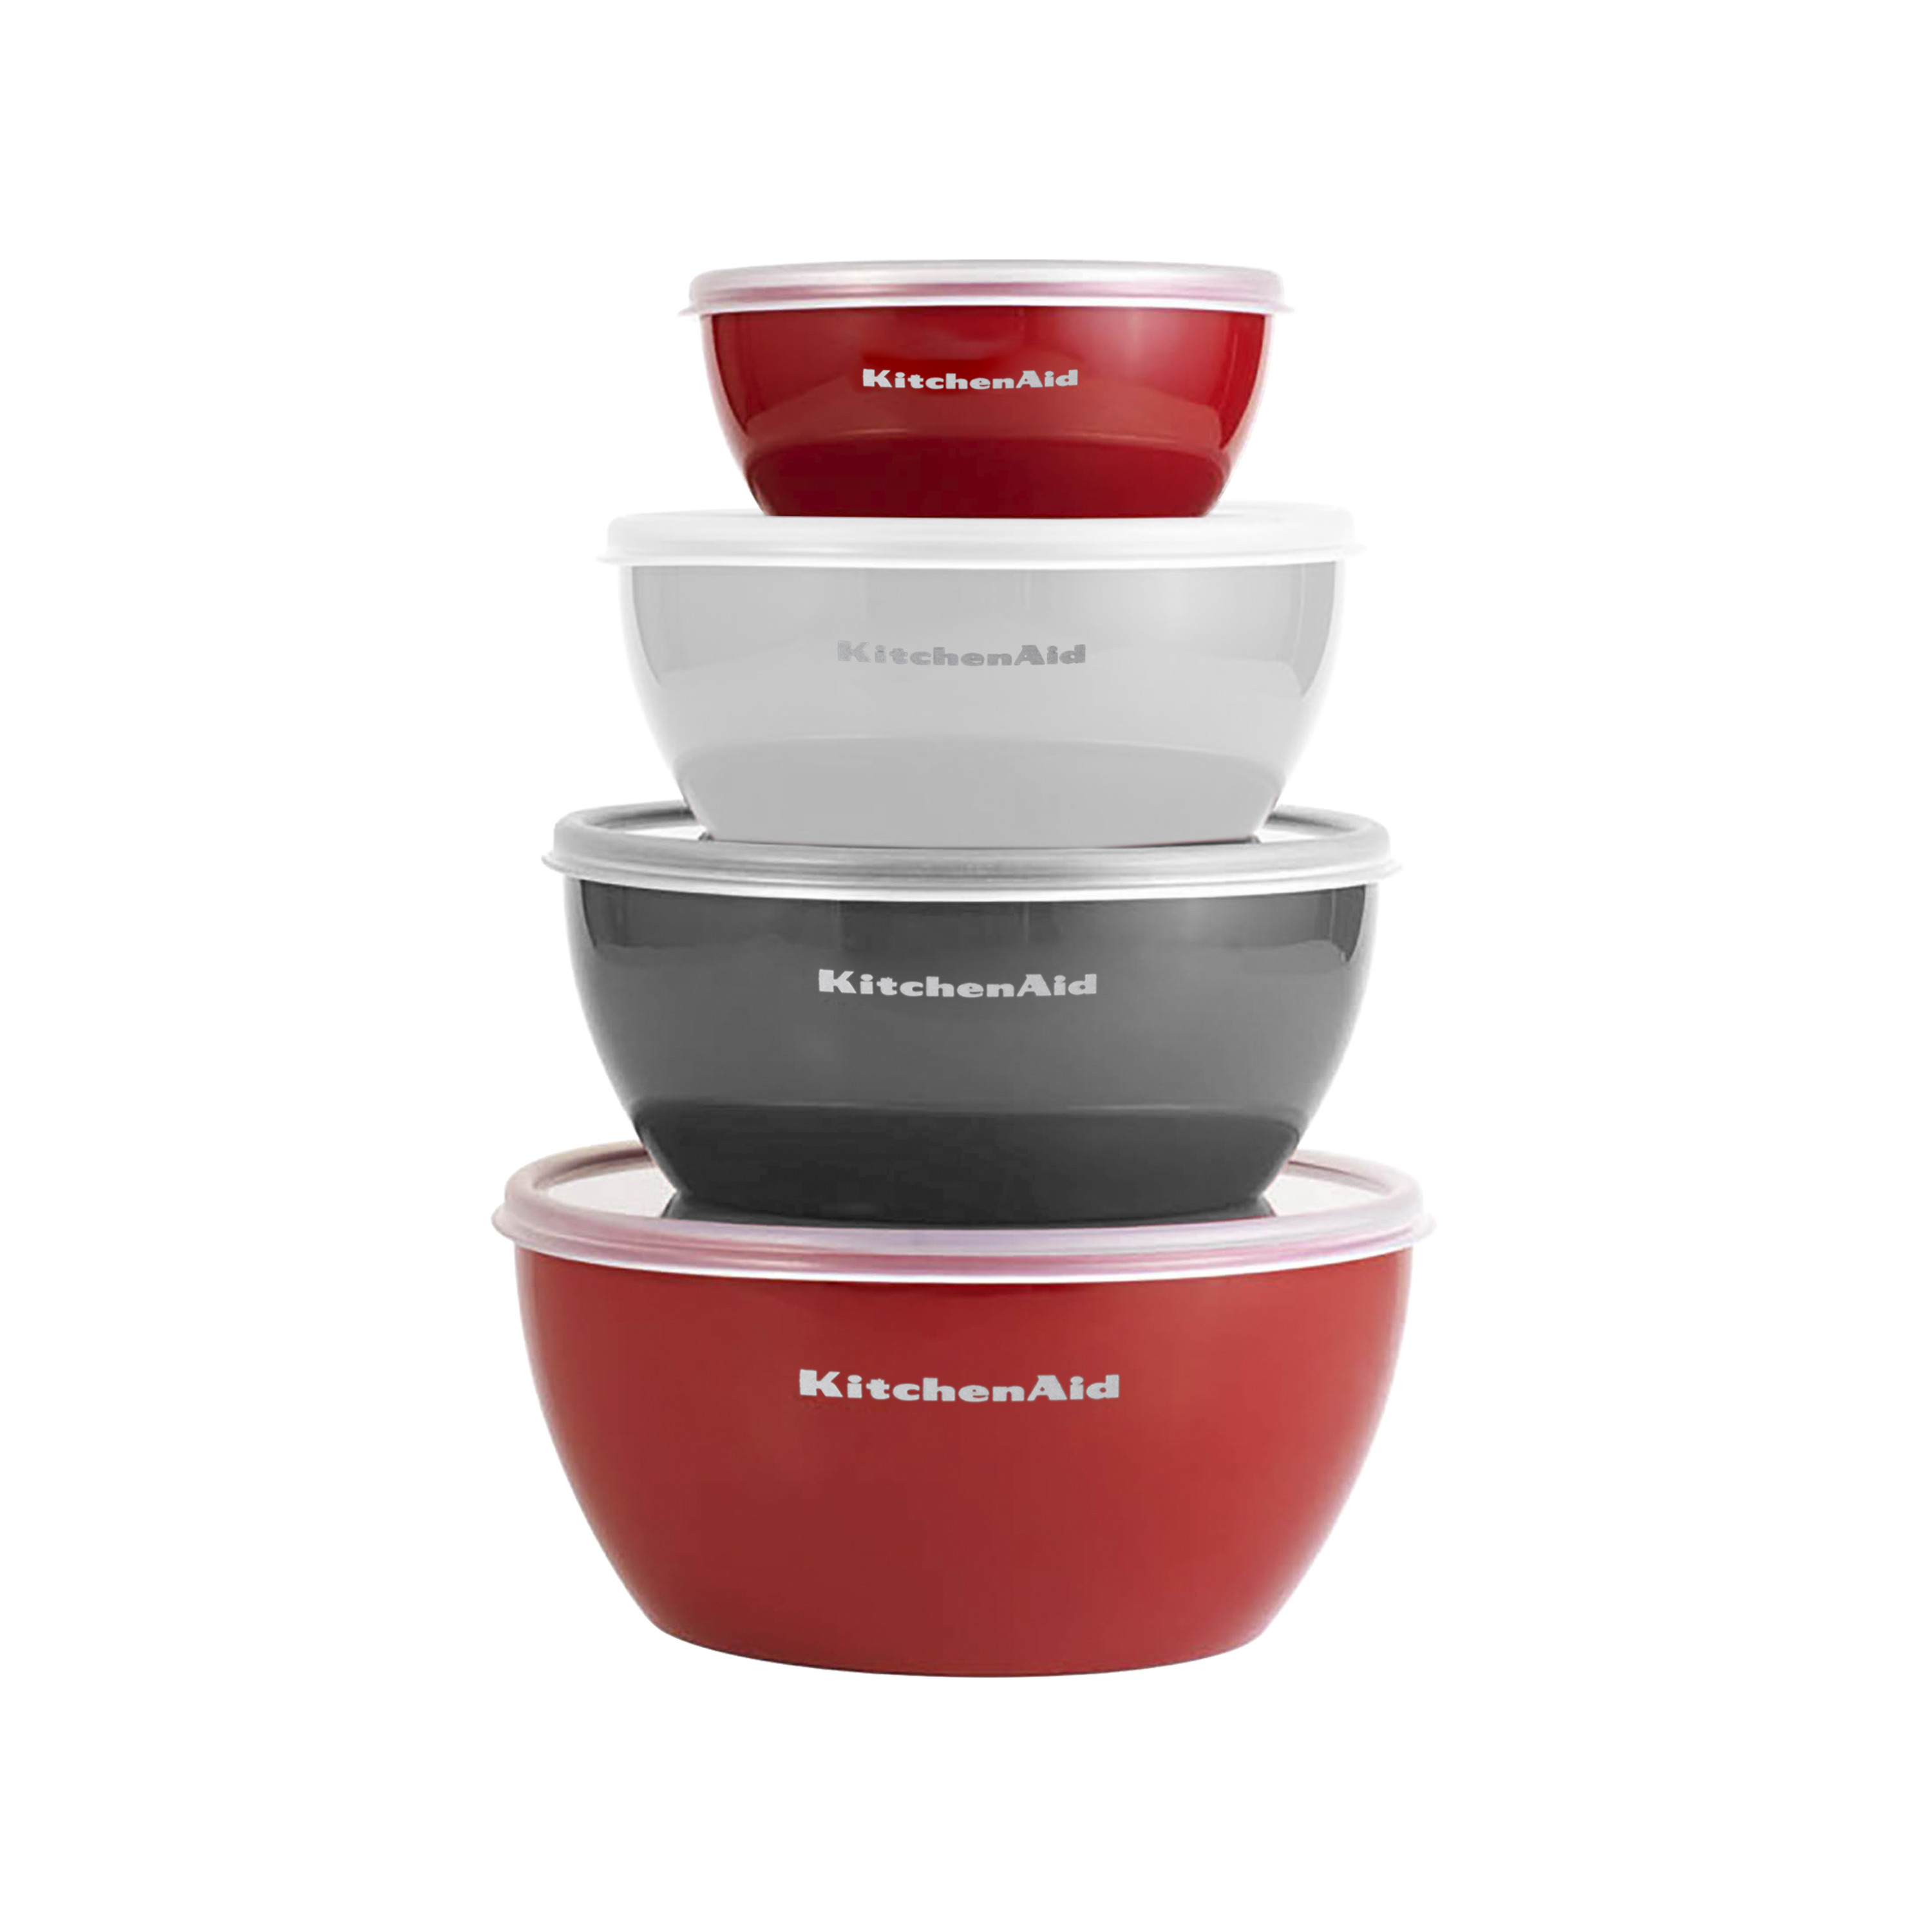 Kitchenaid 4-piece Prep Bowl Set with Lids, Assorted Sizes and Colors: Red, Grey, White - image 2 of 15